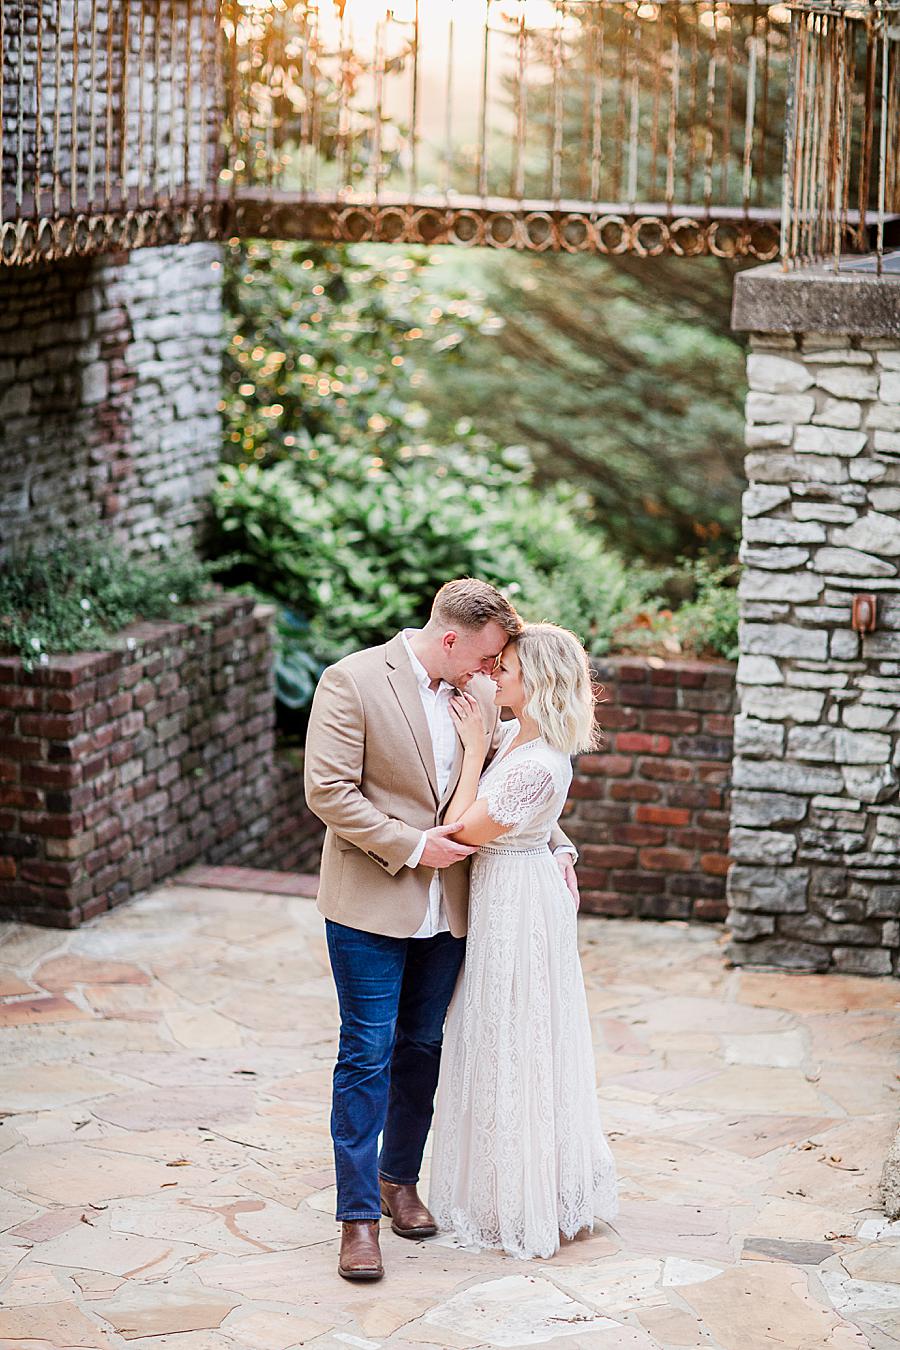 Sport coat and jeans by Knoxville Wedding Photographer, Amanda May Photos.